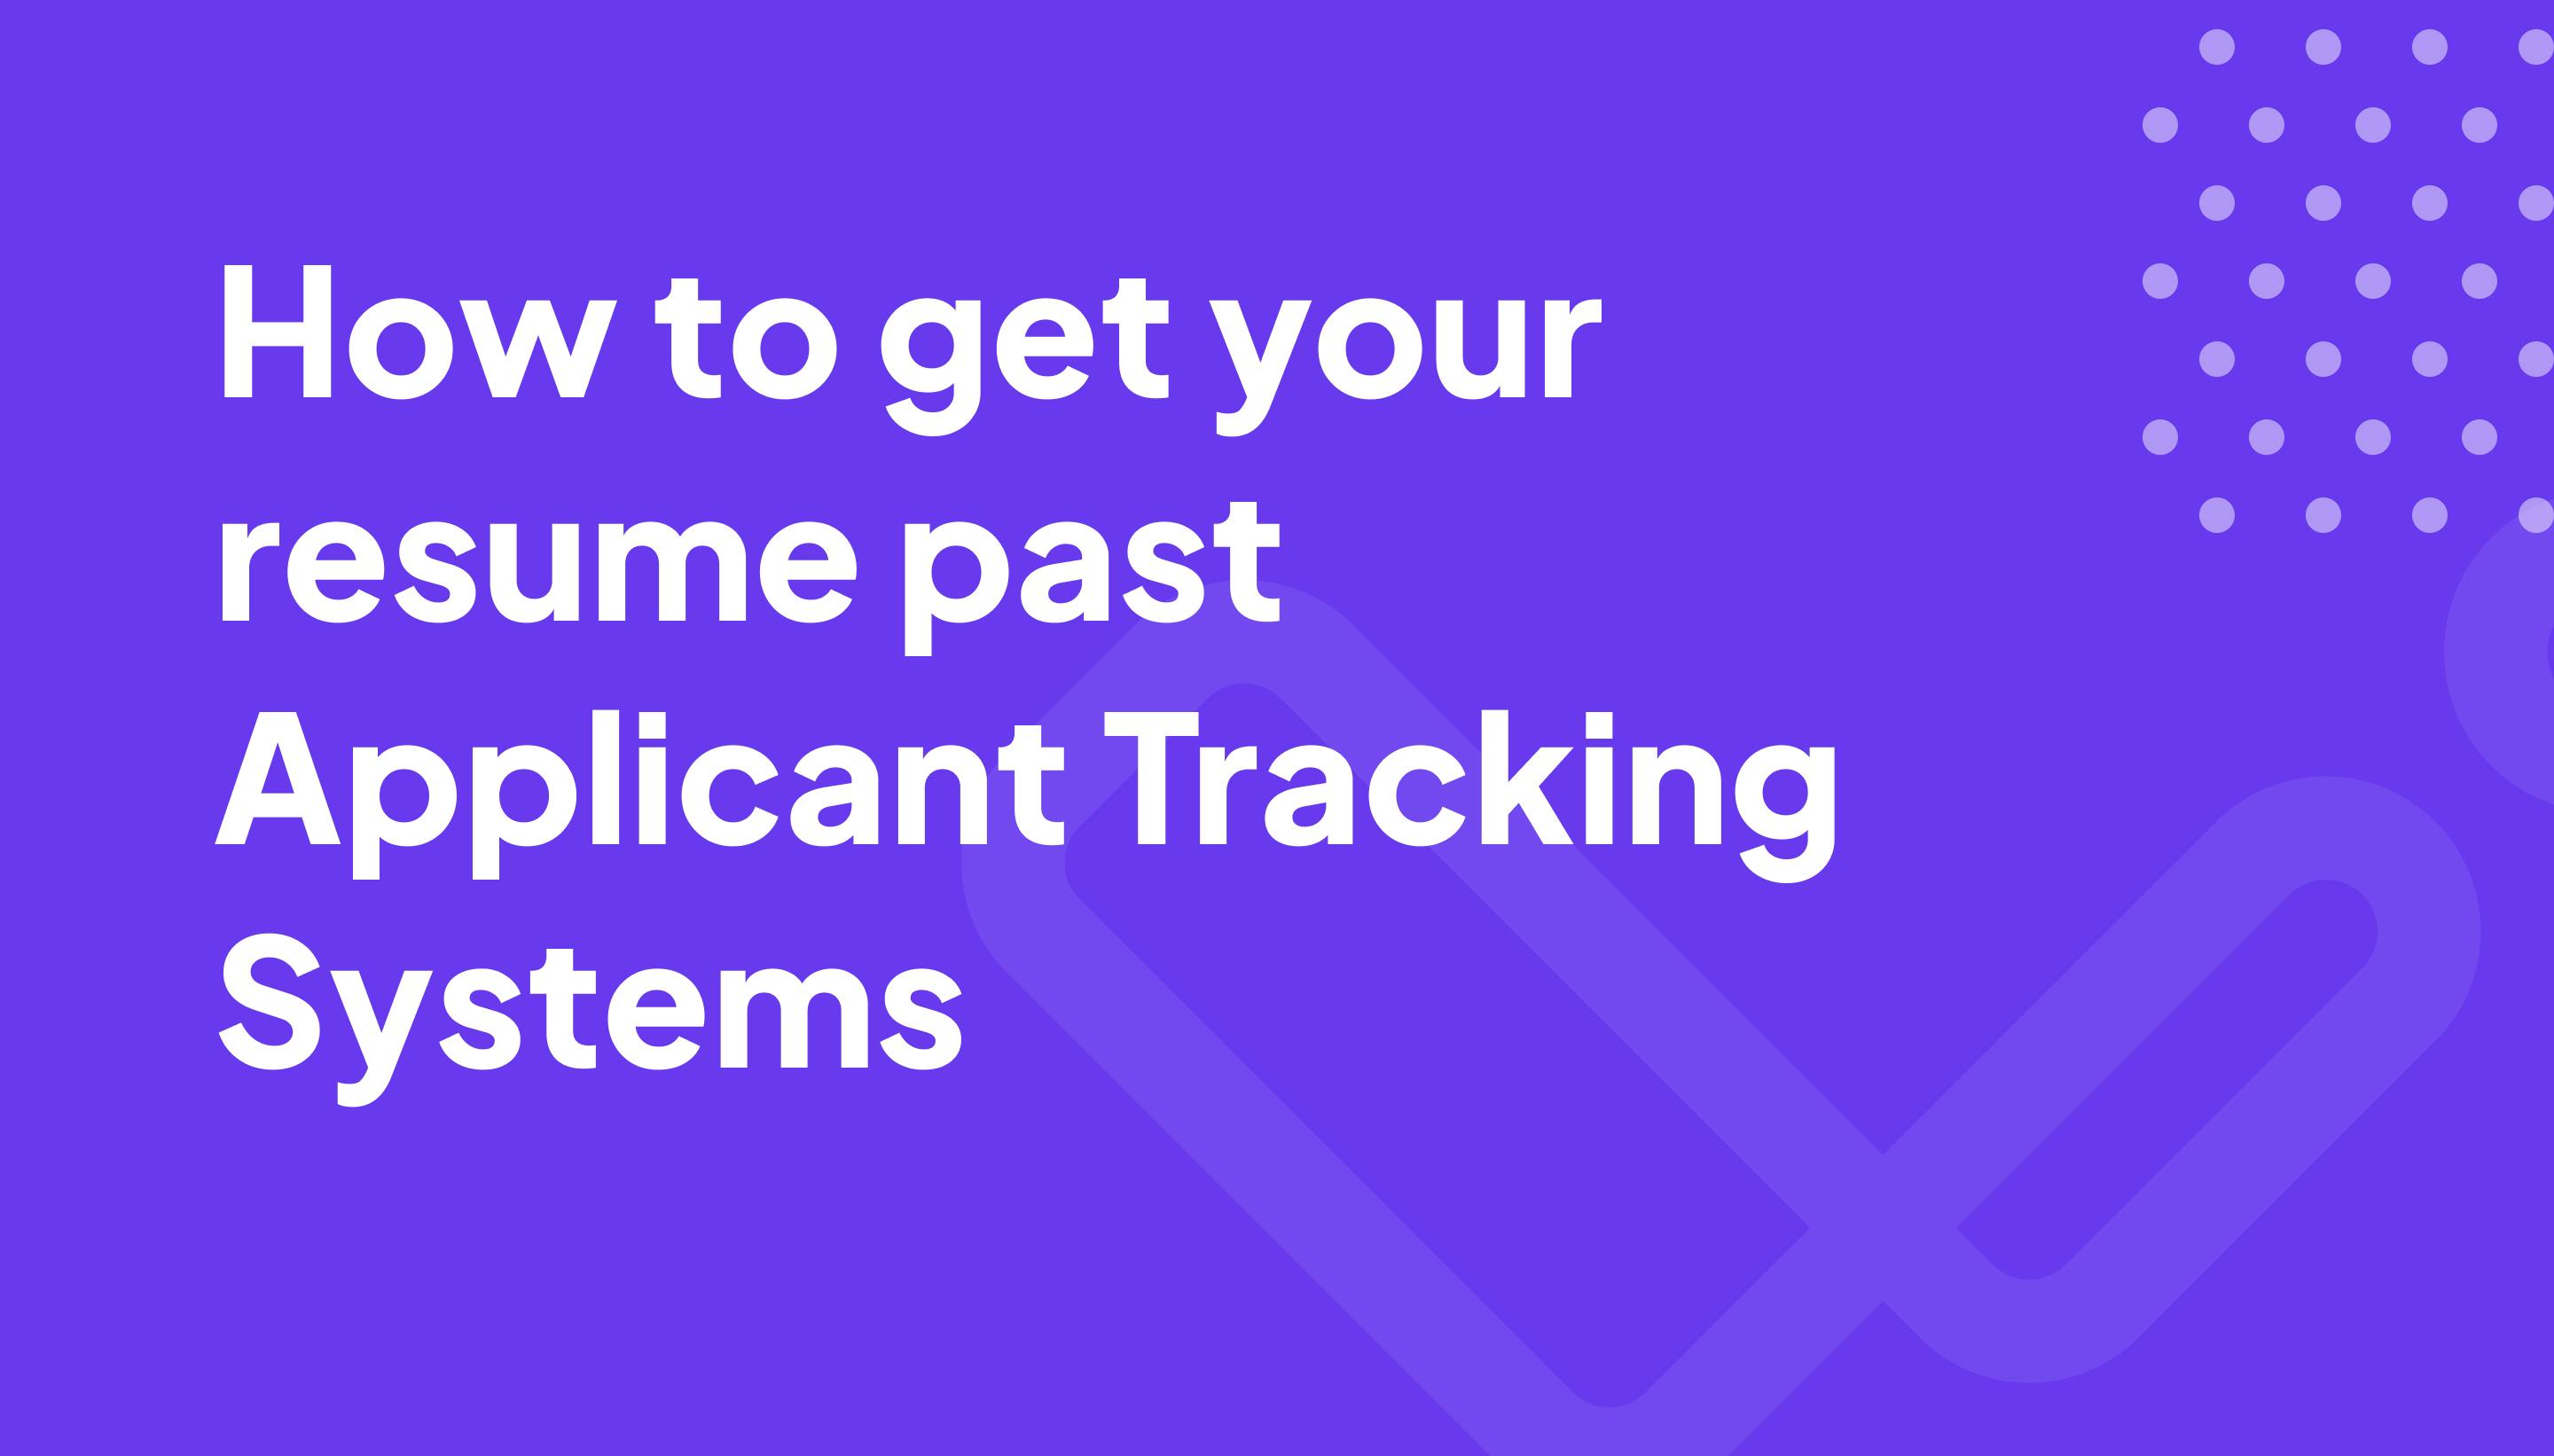 How to get your resume past Applicant Tracking Systems